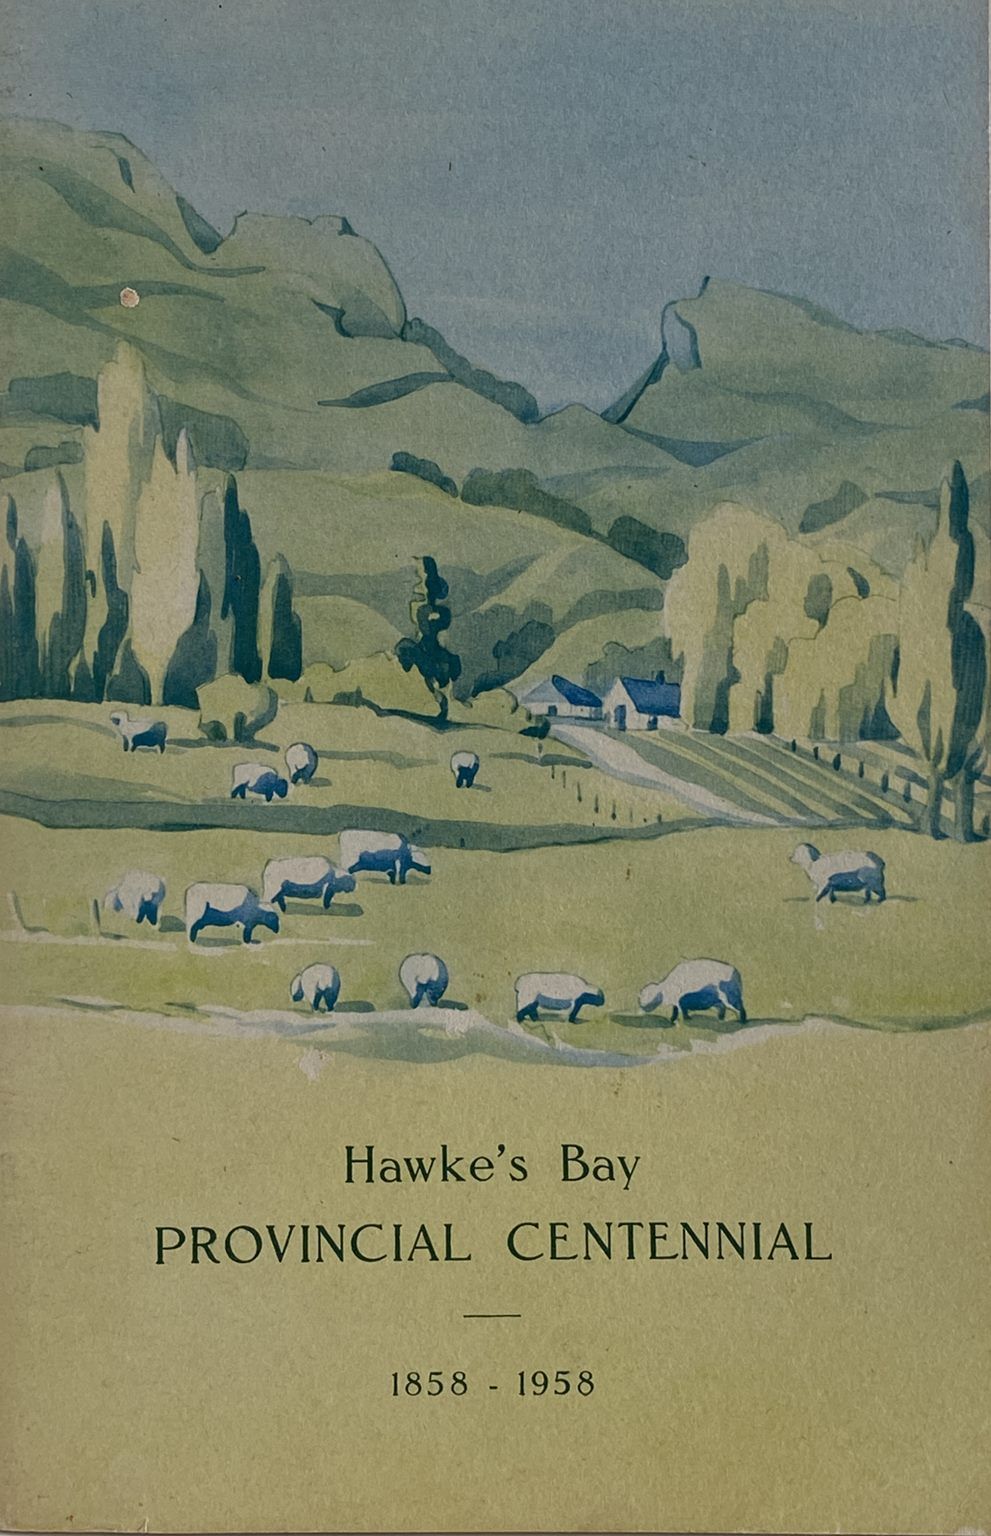 PICTURE of a PROVINCE: Hawke's Bay Provincial Centennial 1858 -1958